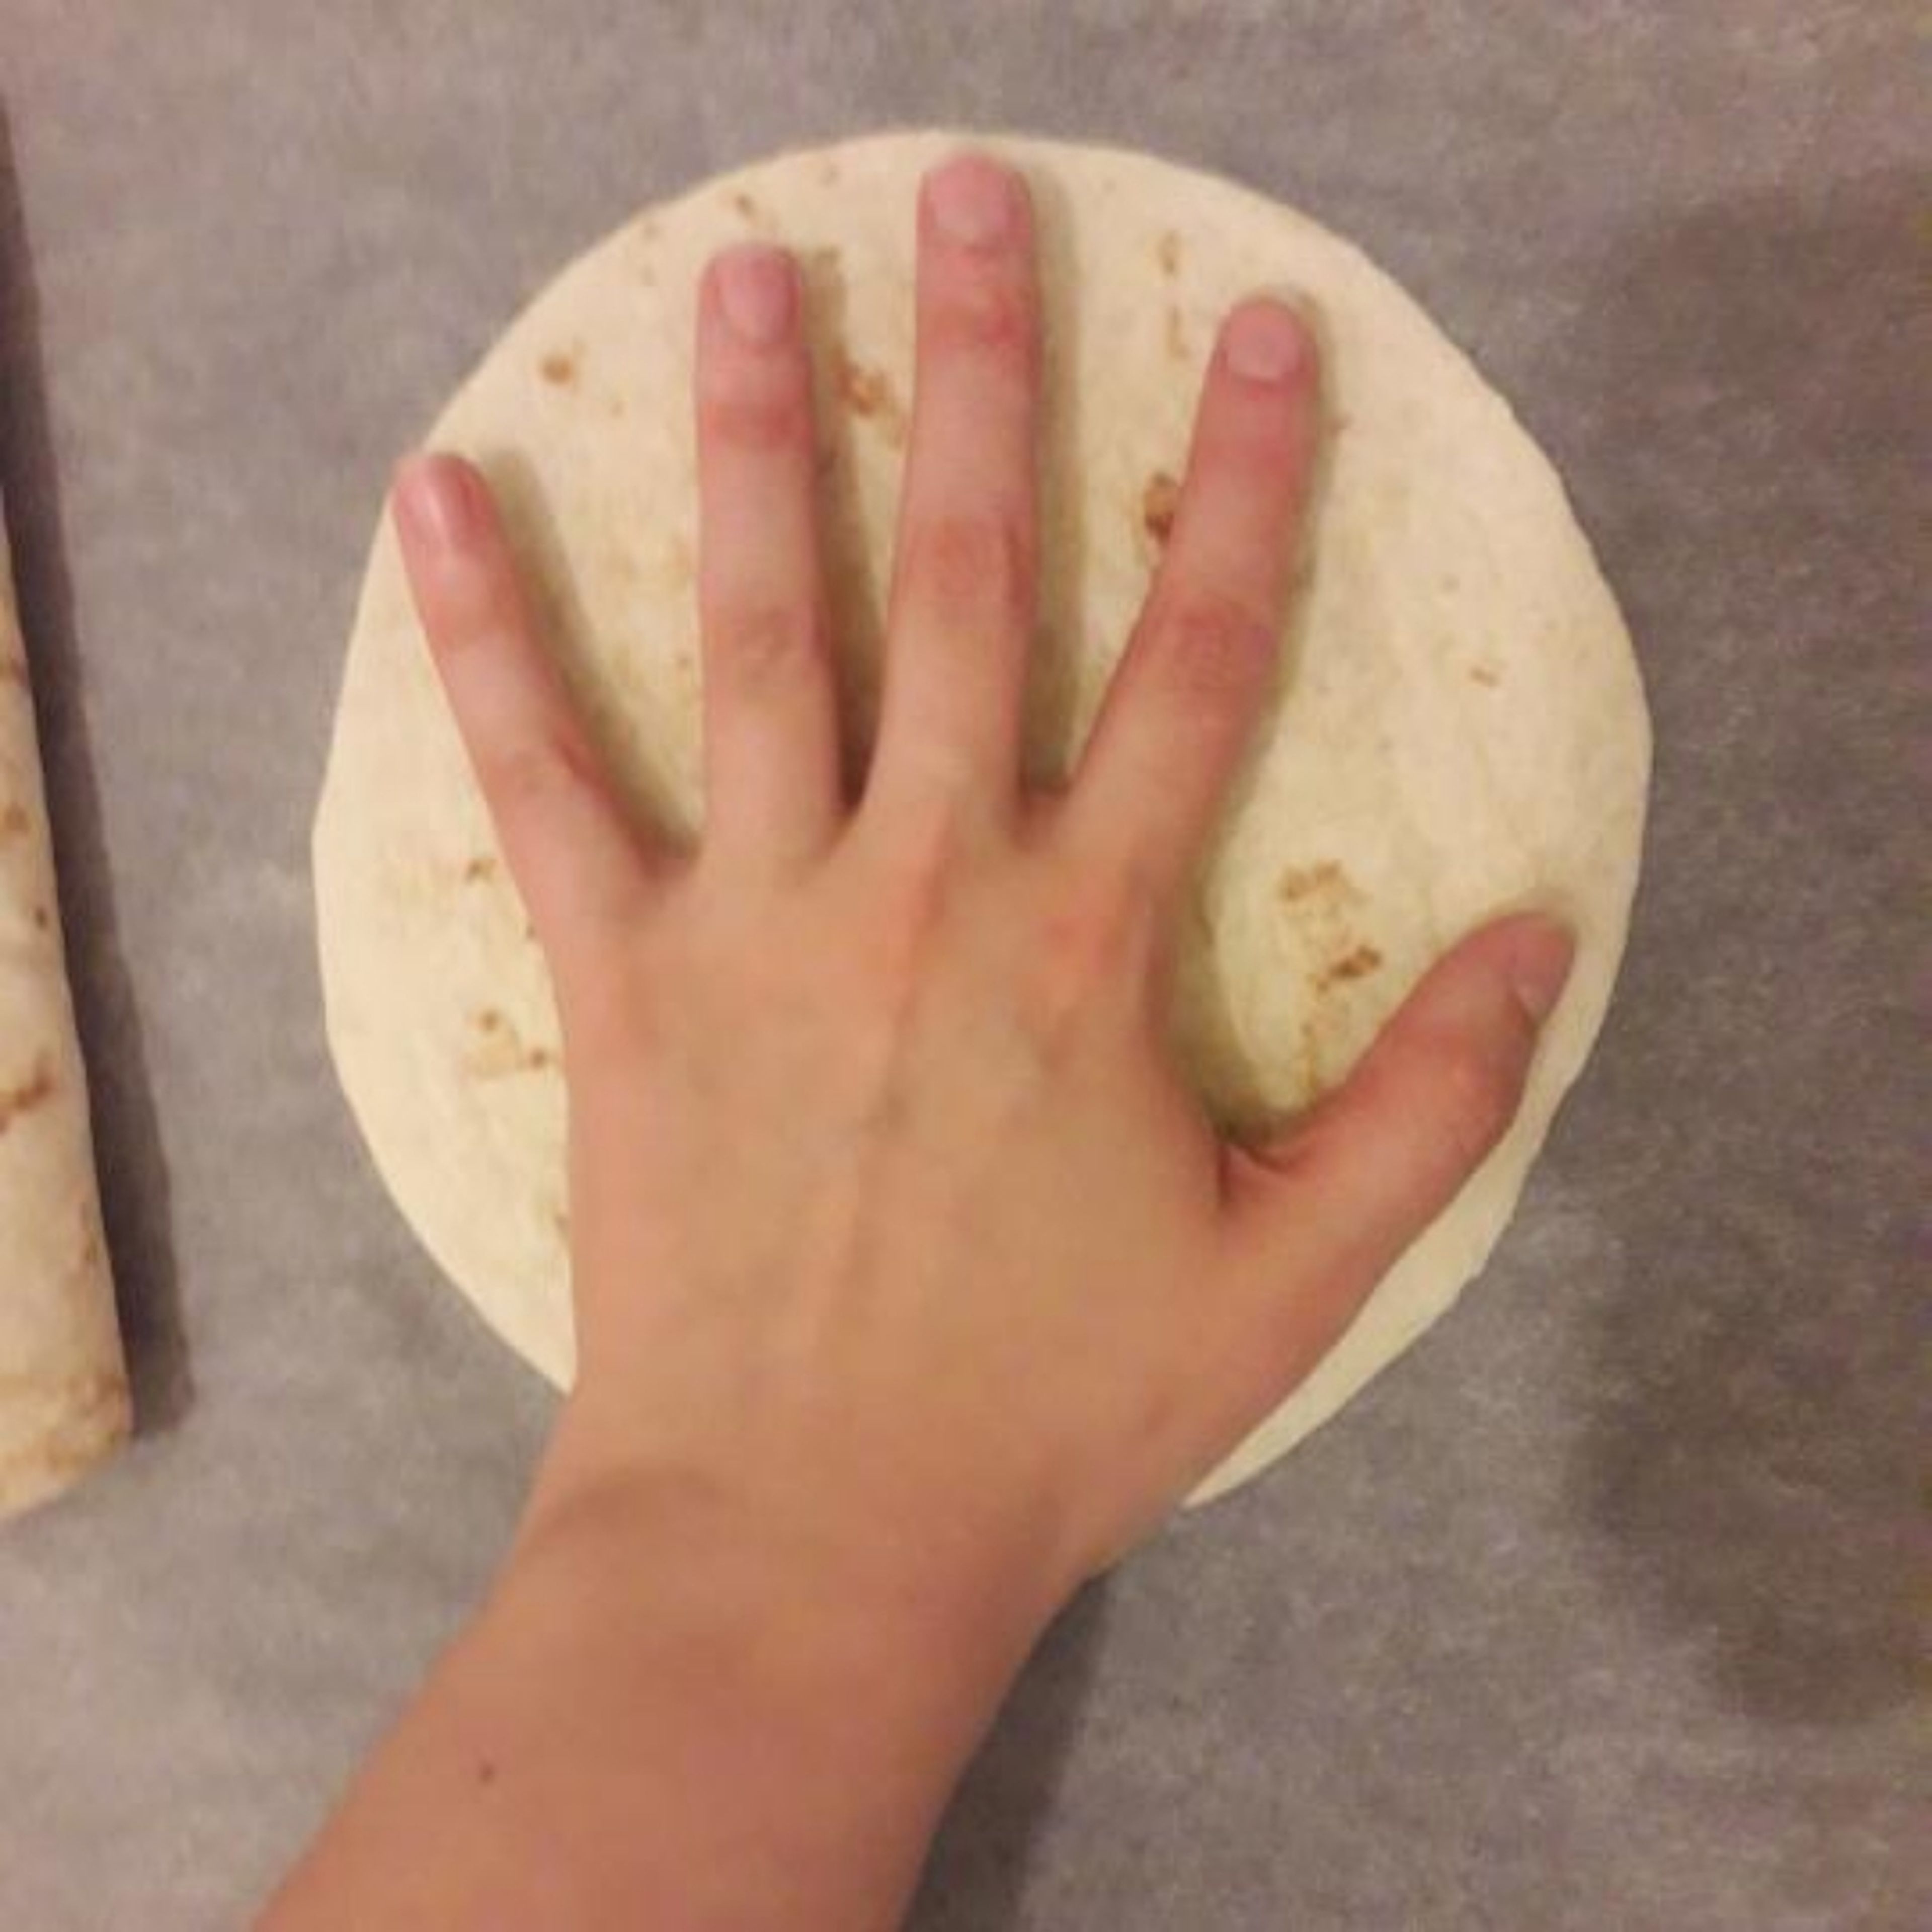 Take your flour/wheat tortillas and place them on the tray with baking parchment on it. Use as much tortillas as you wish, the written serving size is what I usually make for myself if I use the smaller ones (I forgot the exact size sorry).